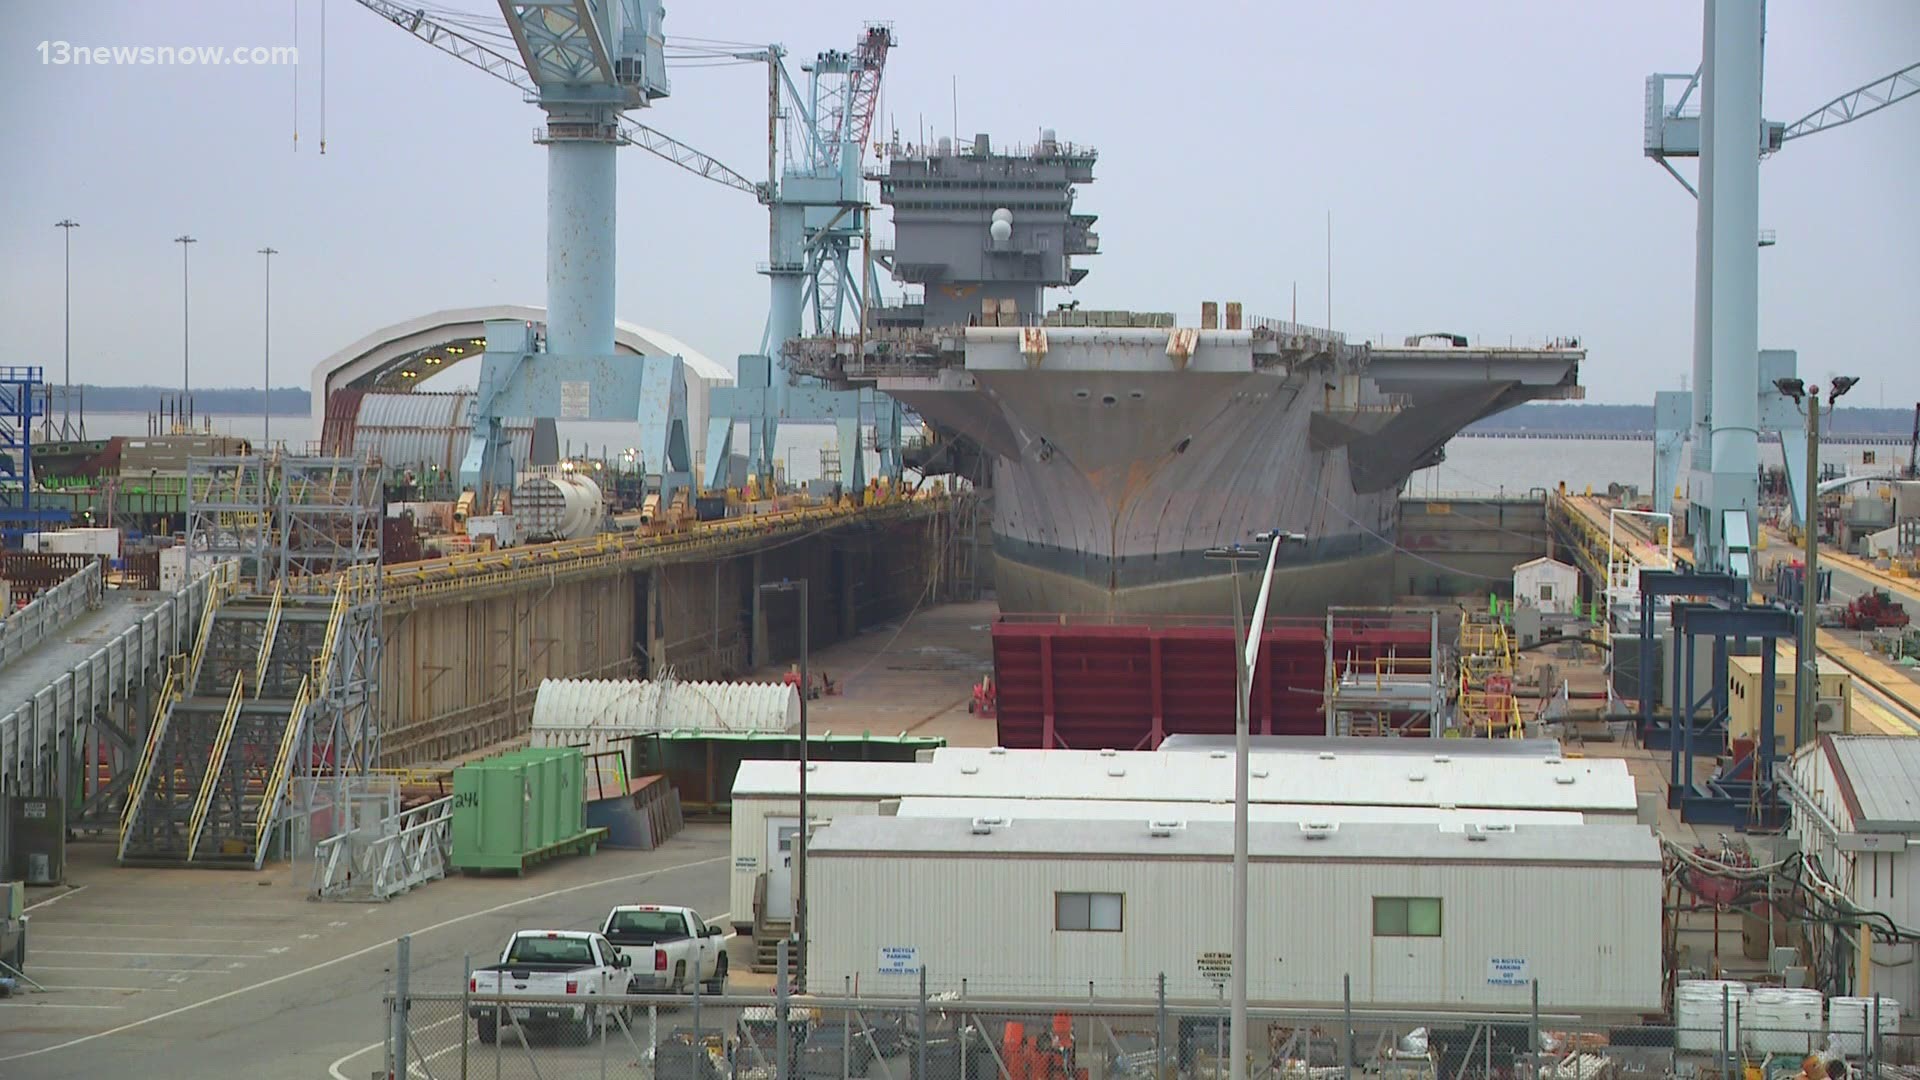 Newport News Shipbuilding lays off 300  workers demotes 100 managers